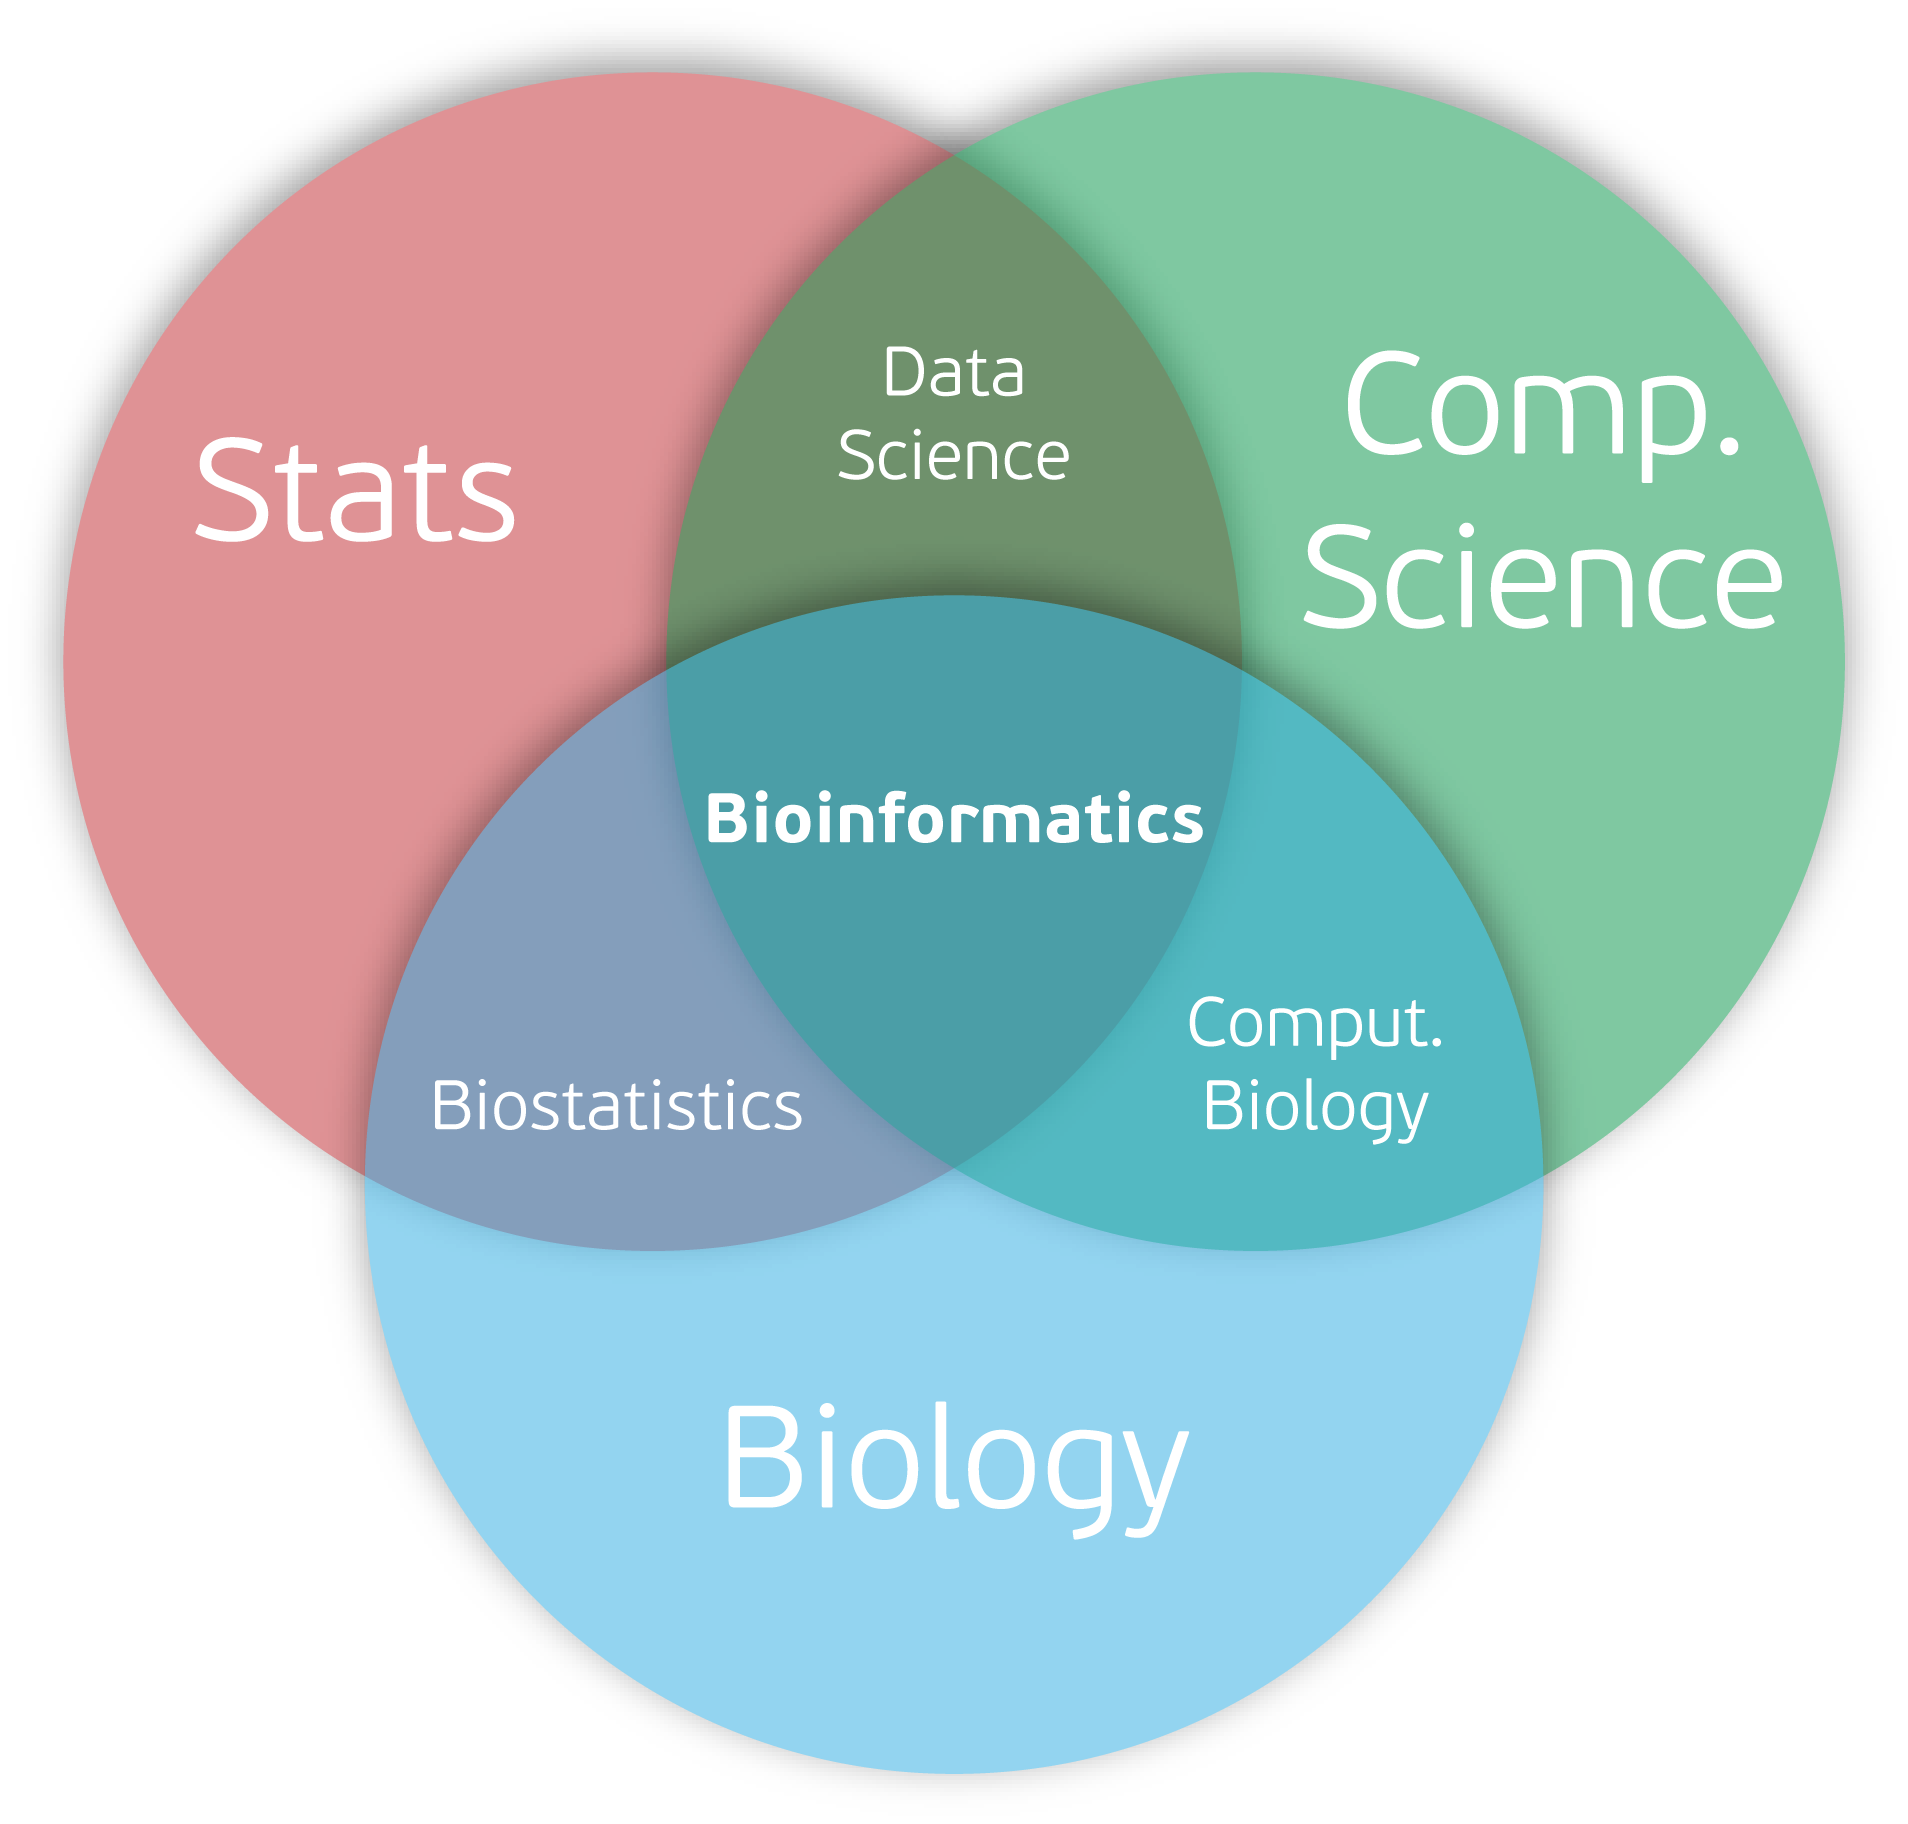 Applications of Bioinformatics in Medicine and Biotechnology